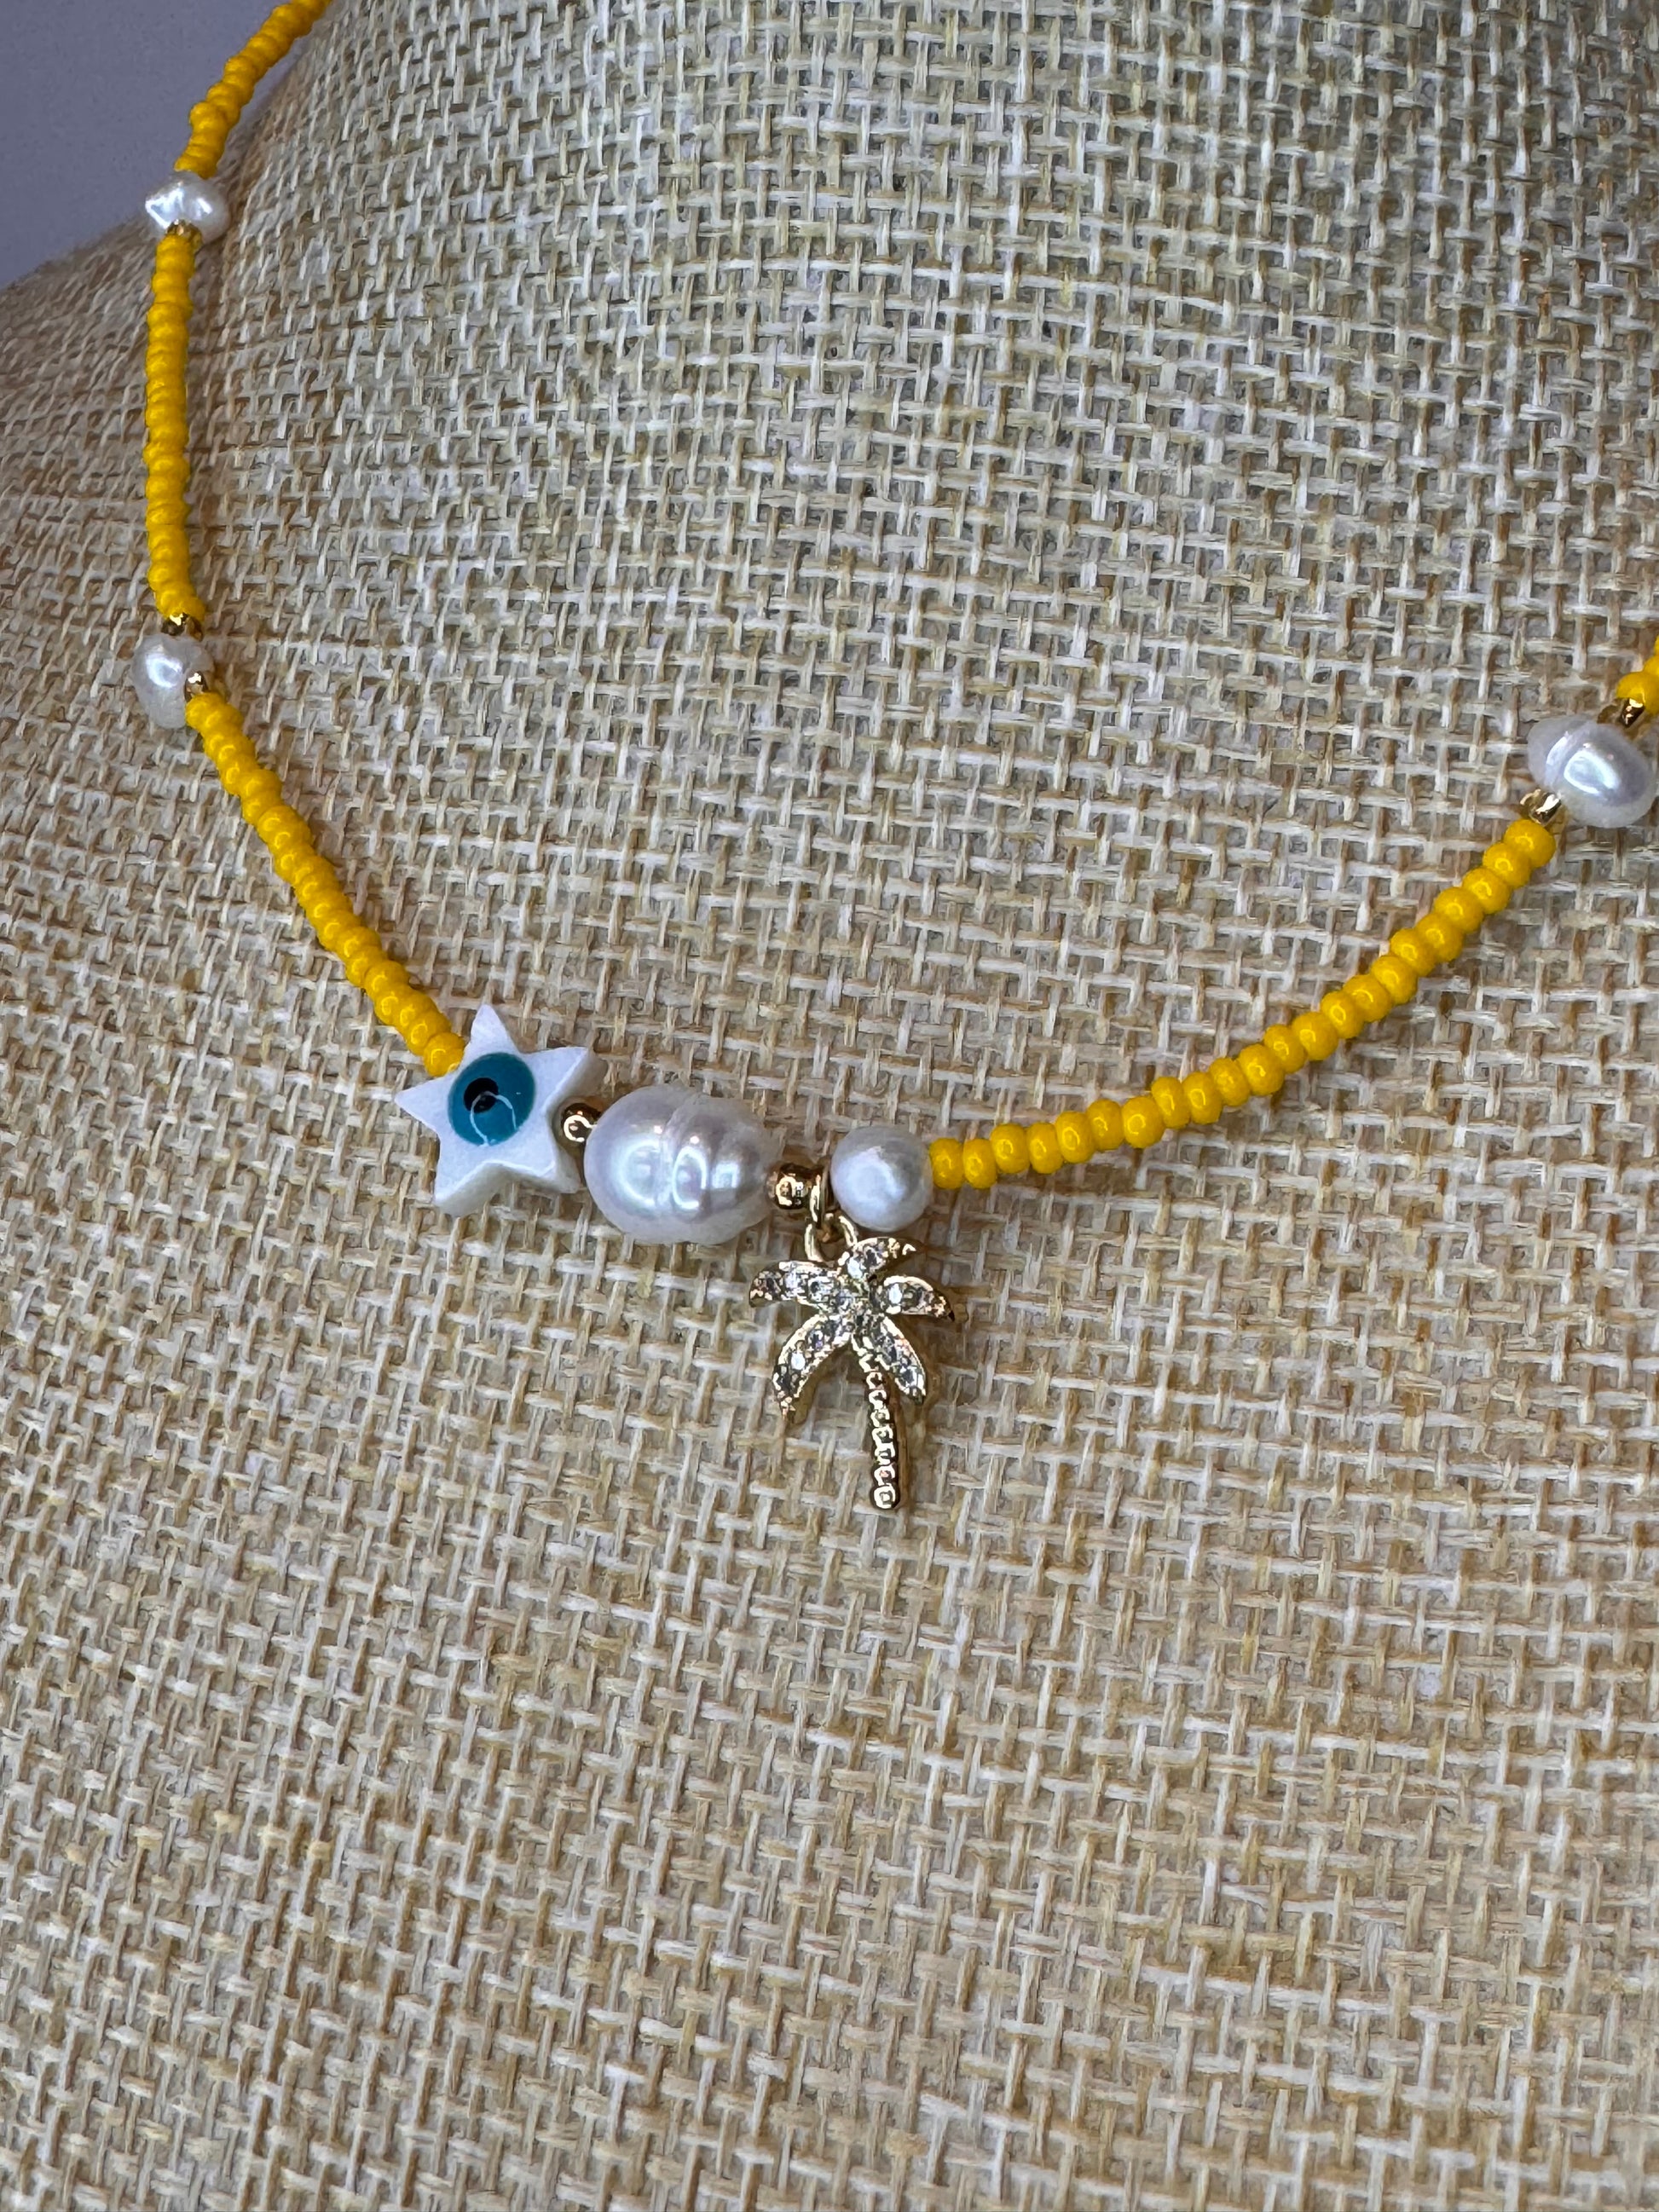 Bead necklace, chocker style, unicolour chocker, freshwater necklace, charm with crystals, handmade, evil eye protection, start necklace, nacre necklace, palm tree charm